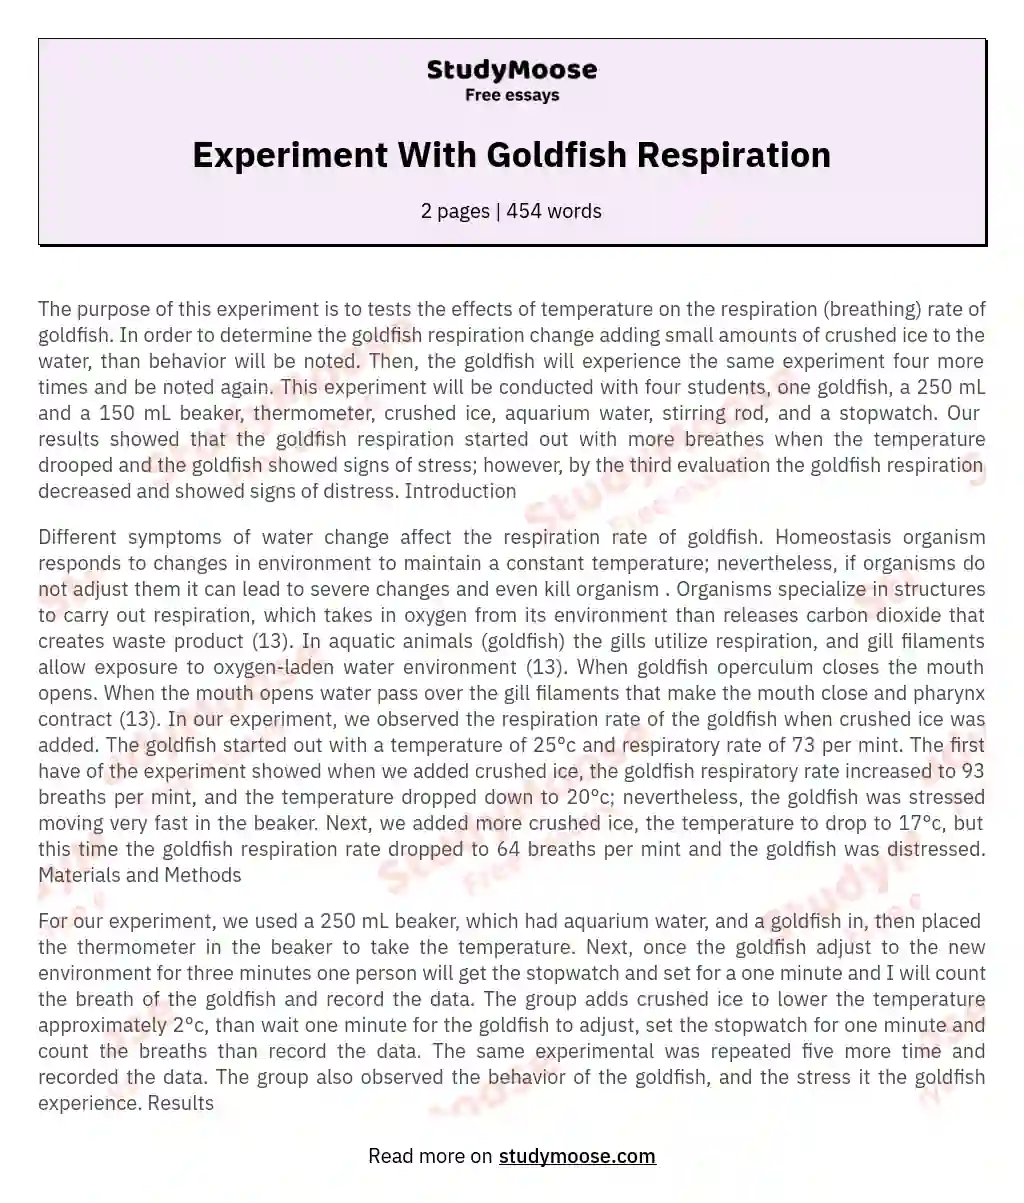 Experiment With Goldfish Respiration essay